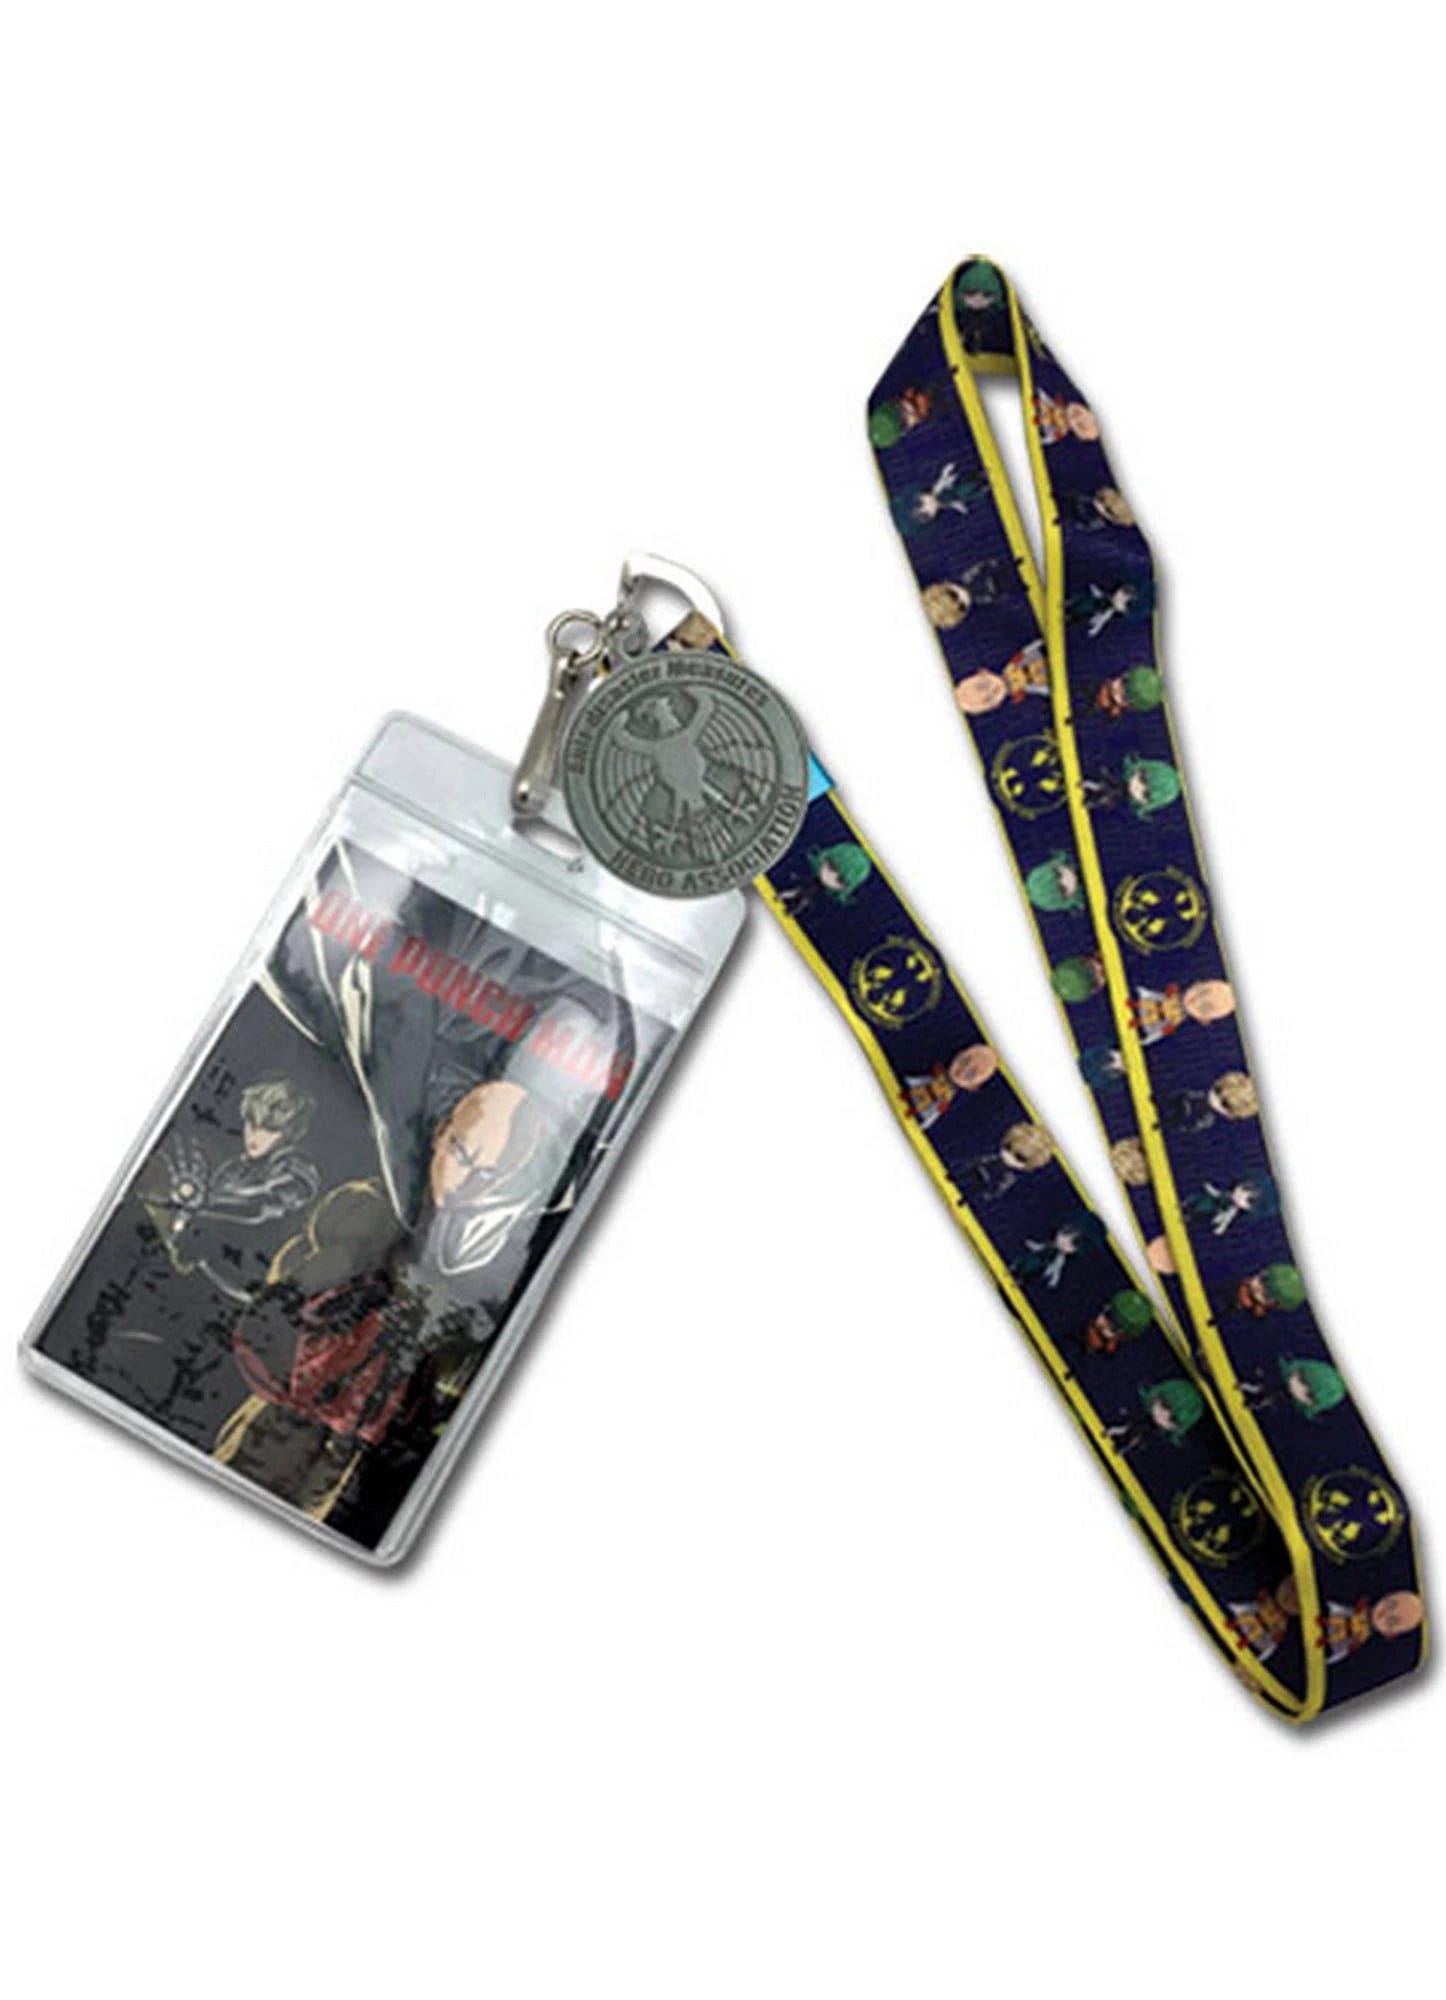 Official One Punch Man Anime Lanyard with Metal Embellishment for ID Holding | Image